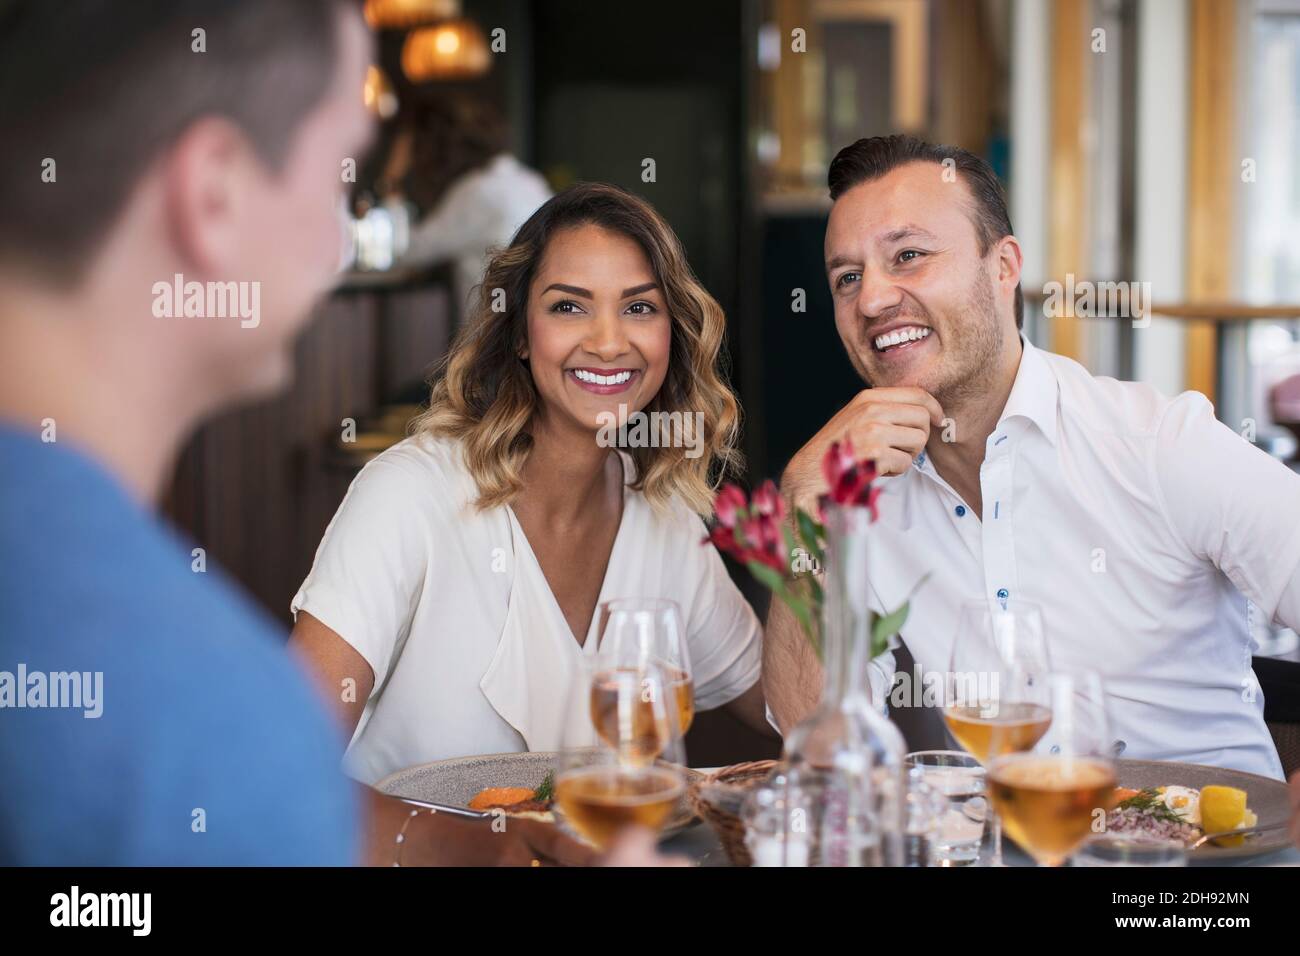 Cheerful colleagues looking at businessman during lunch at restaurant Stock Photo